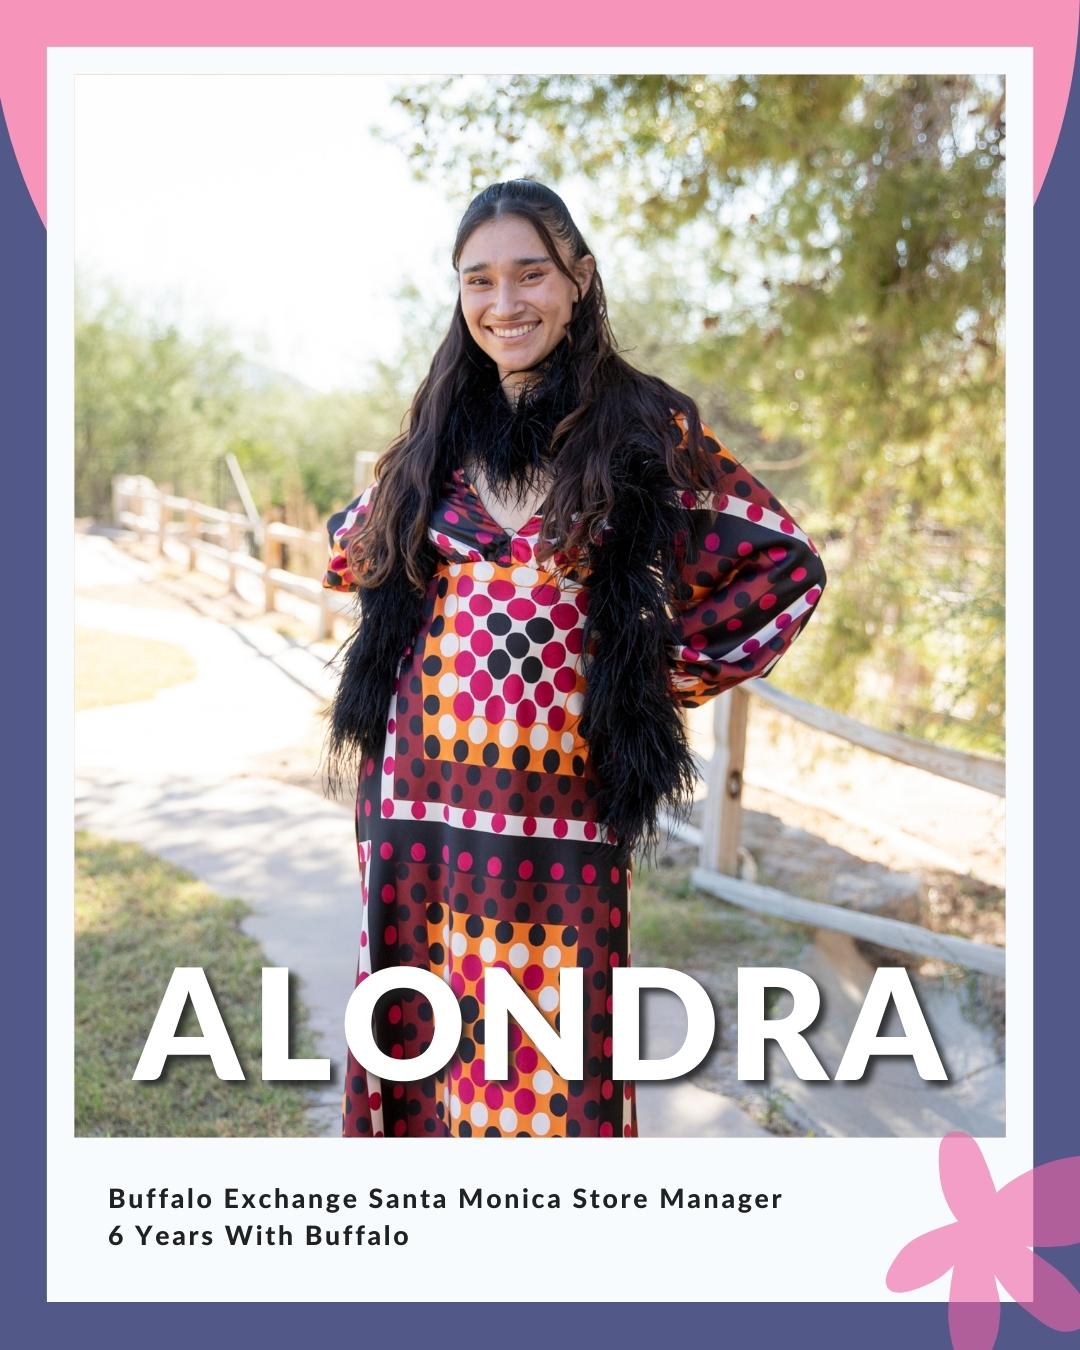 Photo of Alondra standing in crochet dress; reads "Buffalo Exchange Santa Monica Store Manager, 6 Years With Buffalo